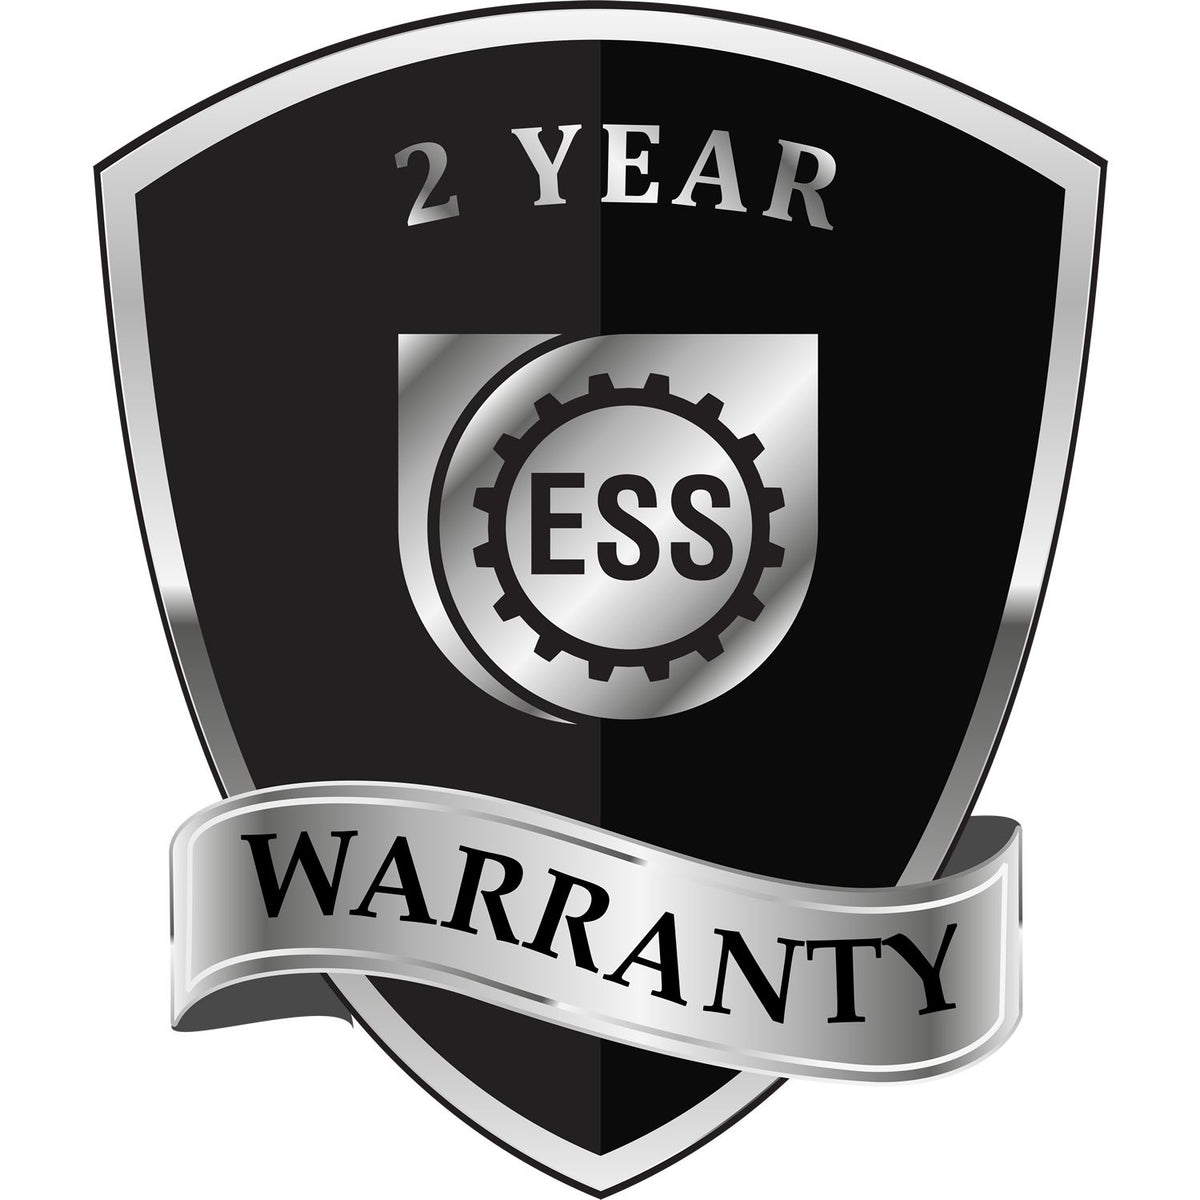 A badge or emblem showing a warranty icon for the Heavy Duty Cast Iron Idaho Architect Embosser